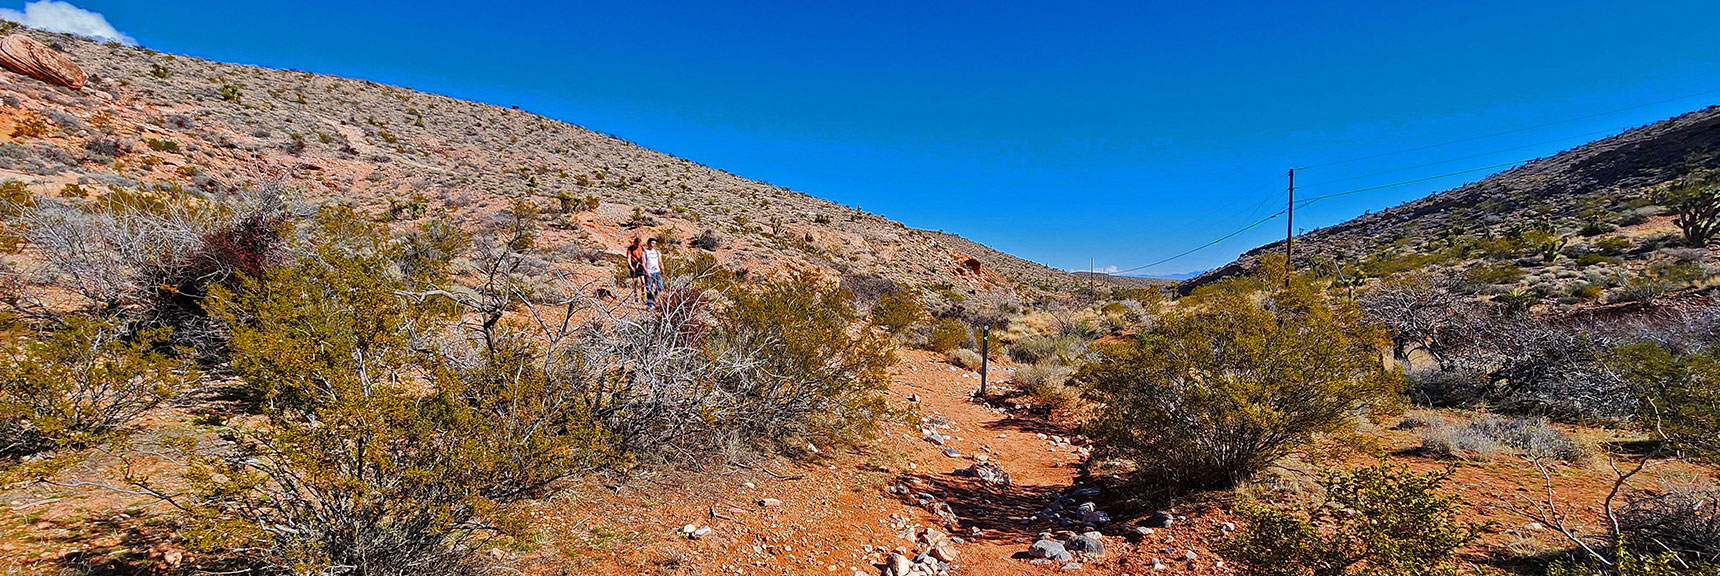 At Southeast Corner of Calico Hills Take a Left onto the Red Spring Ridge Trail | Calico Basin Daily Workout Trails | Calico Basin, Nevada